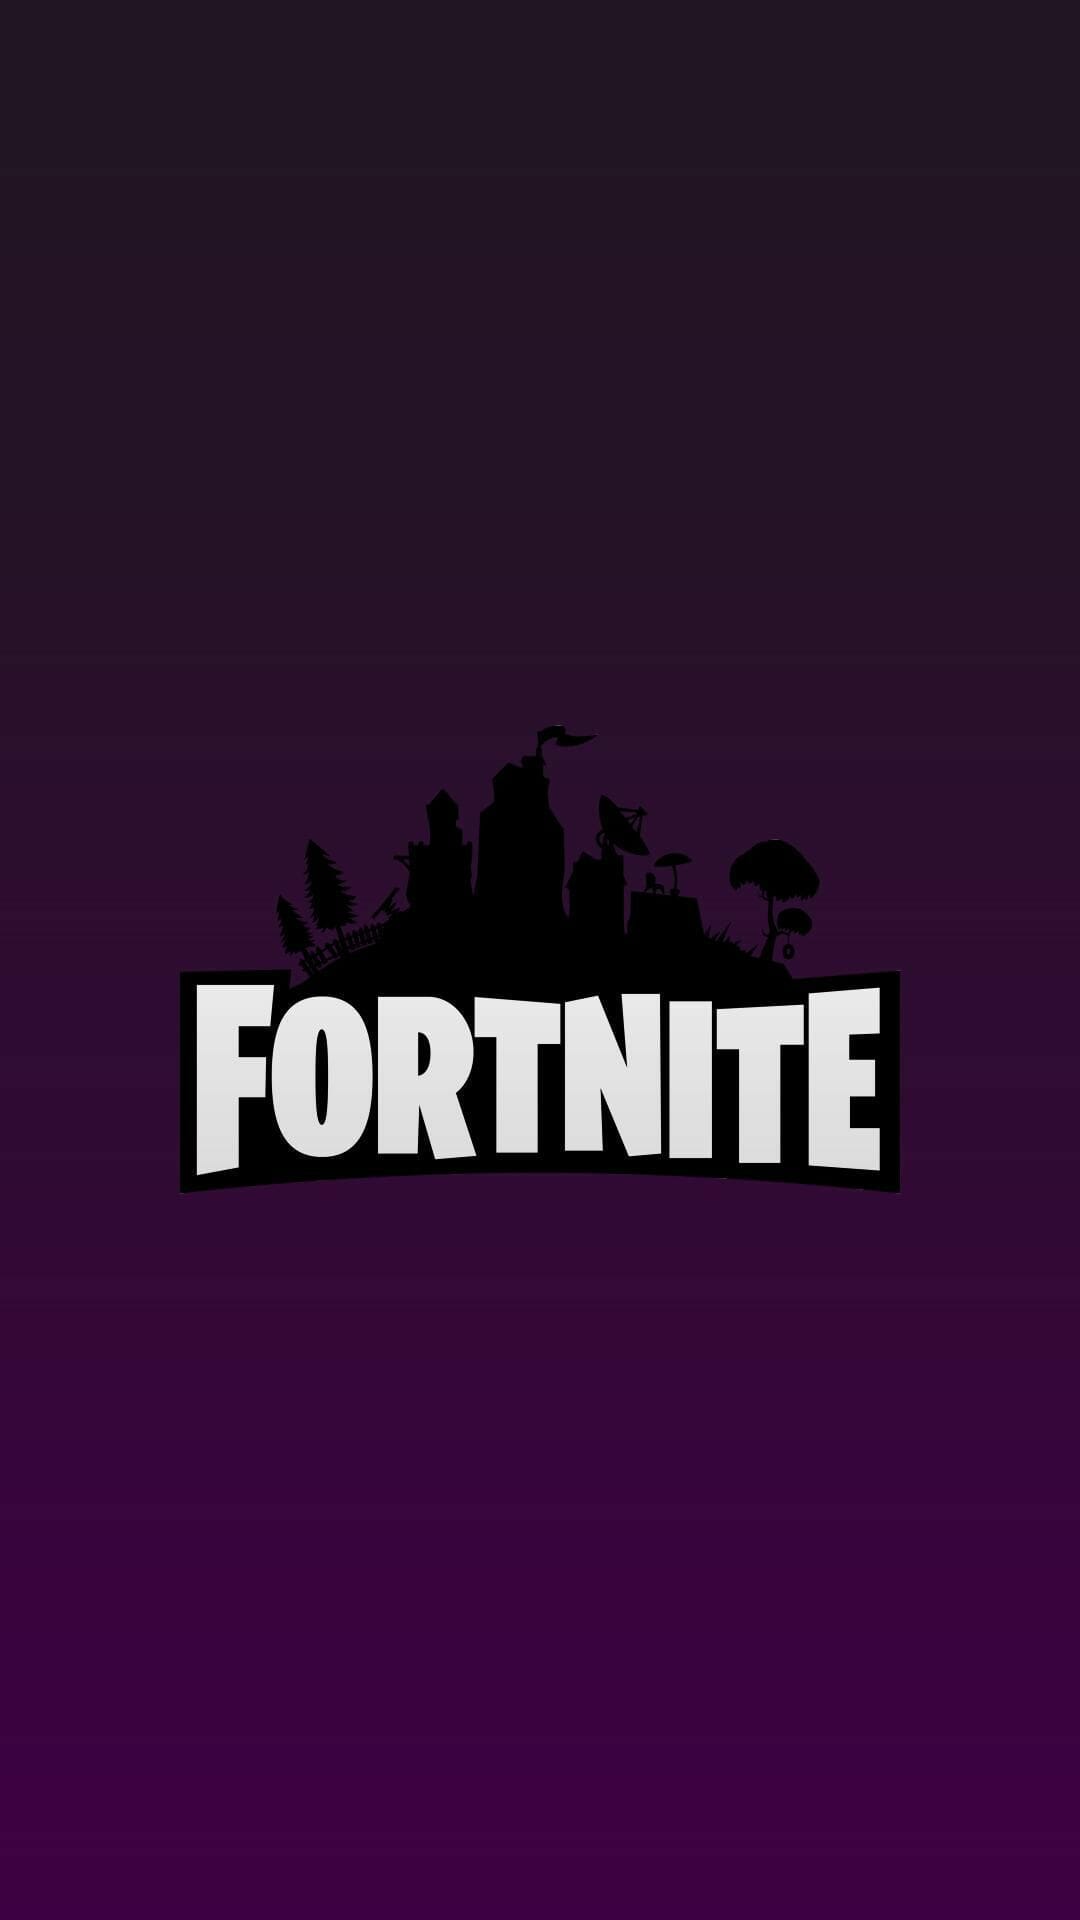 Cool Fortnite Wallpaper HD Resolution Hupages Download iPhone / iPhone HD Wallpaper Background Download HD Wallpaper (Desktop Background / Android / iPhone) (1080p, 4k) (1080x1920)